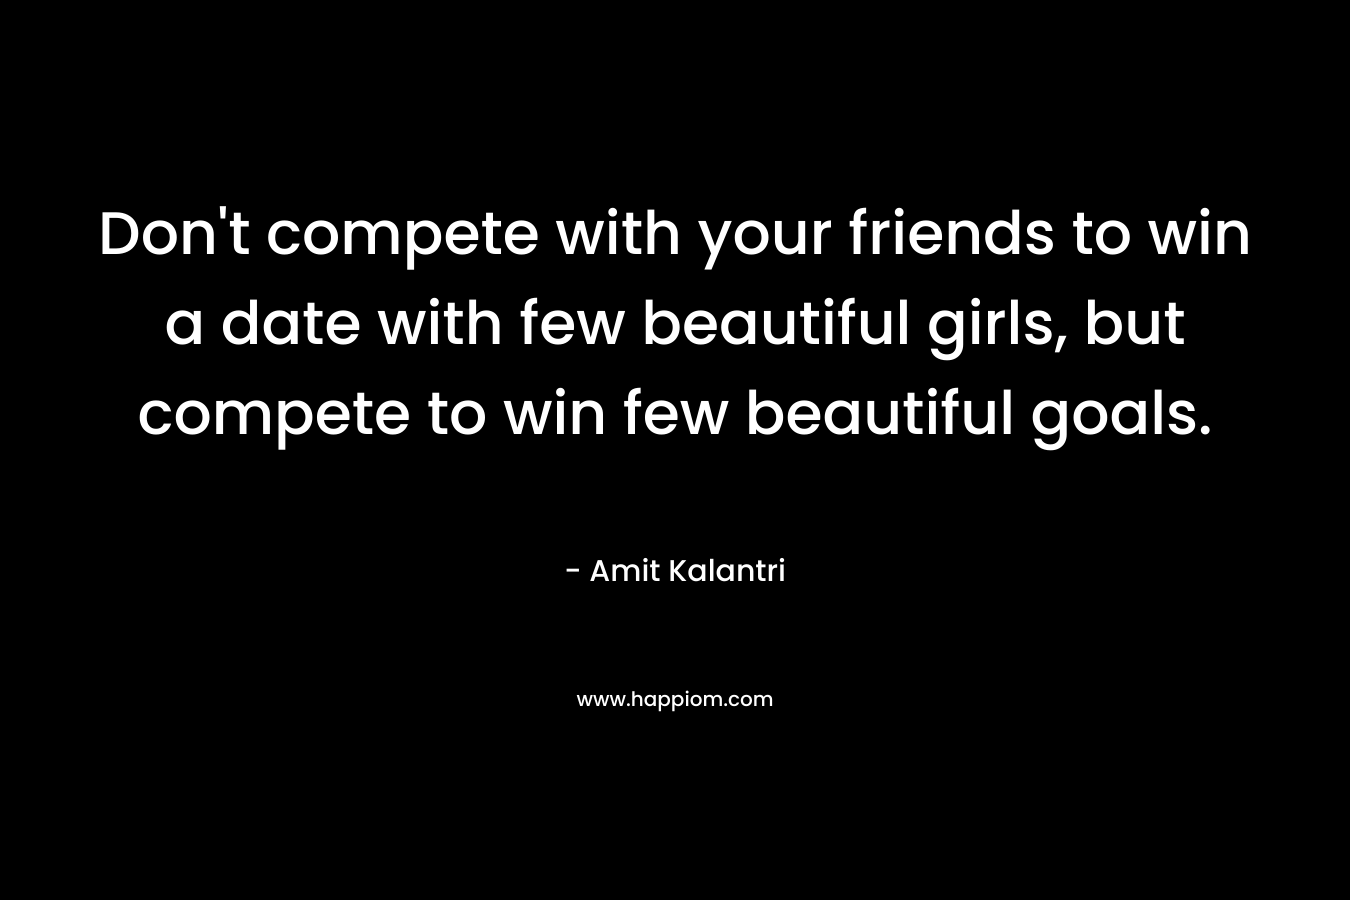 Don't compete with your friends to win a date with few beautiful girls, but compete to win few beautiful goals.